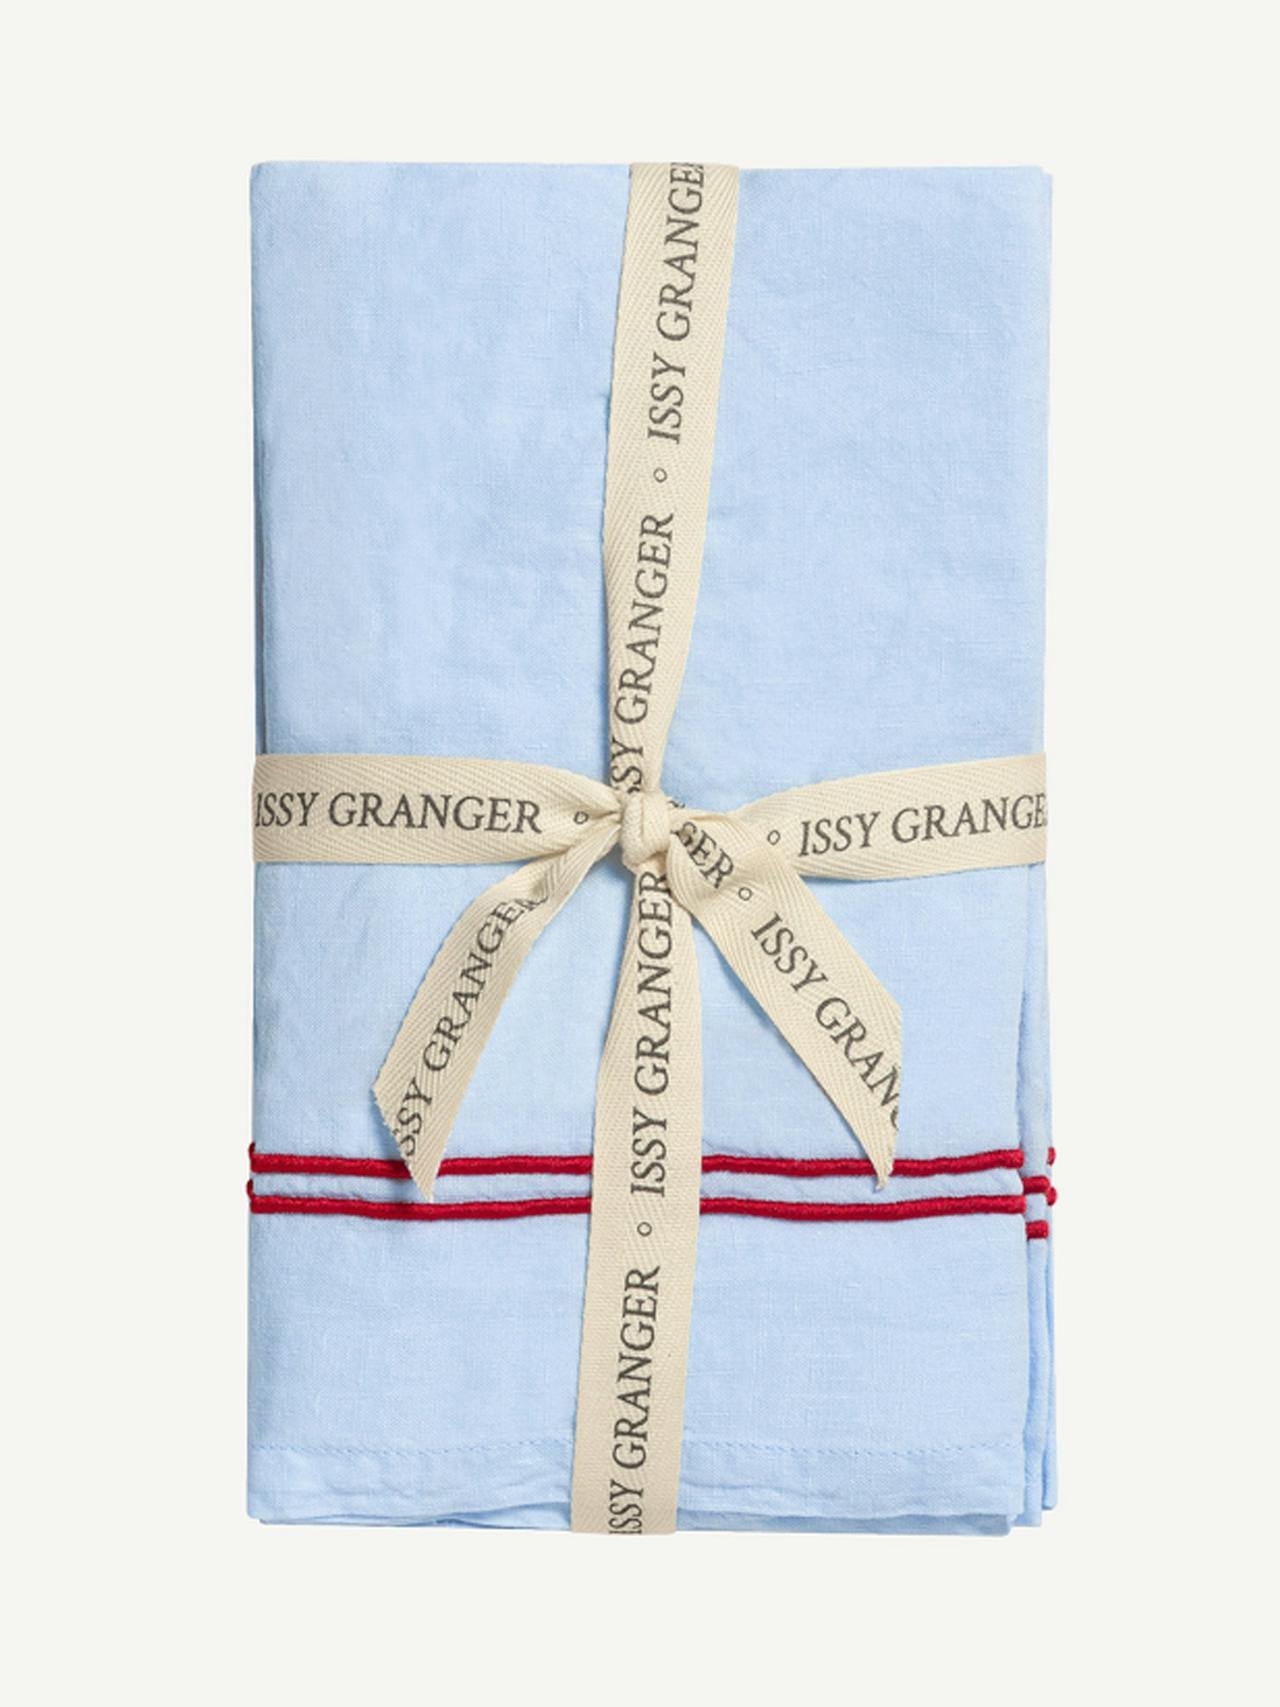 Blue double piped linen napkins